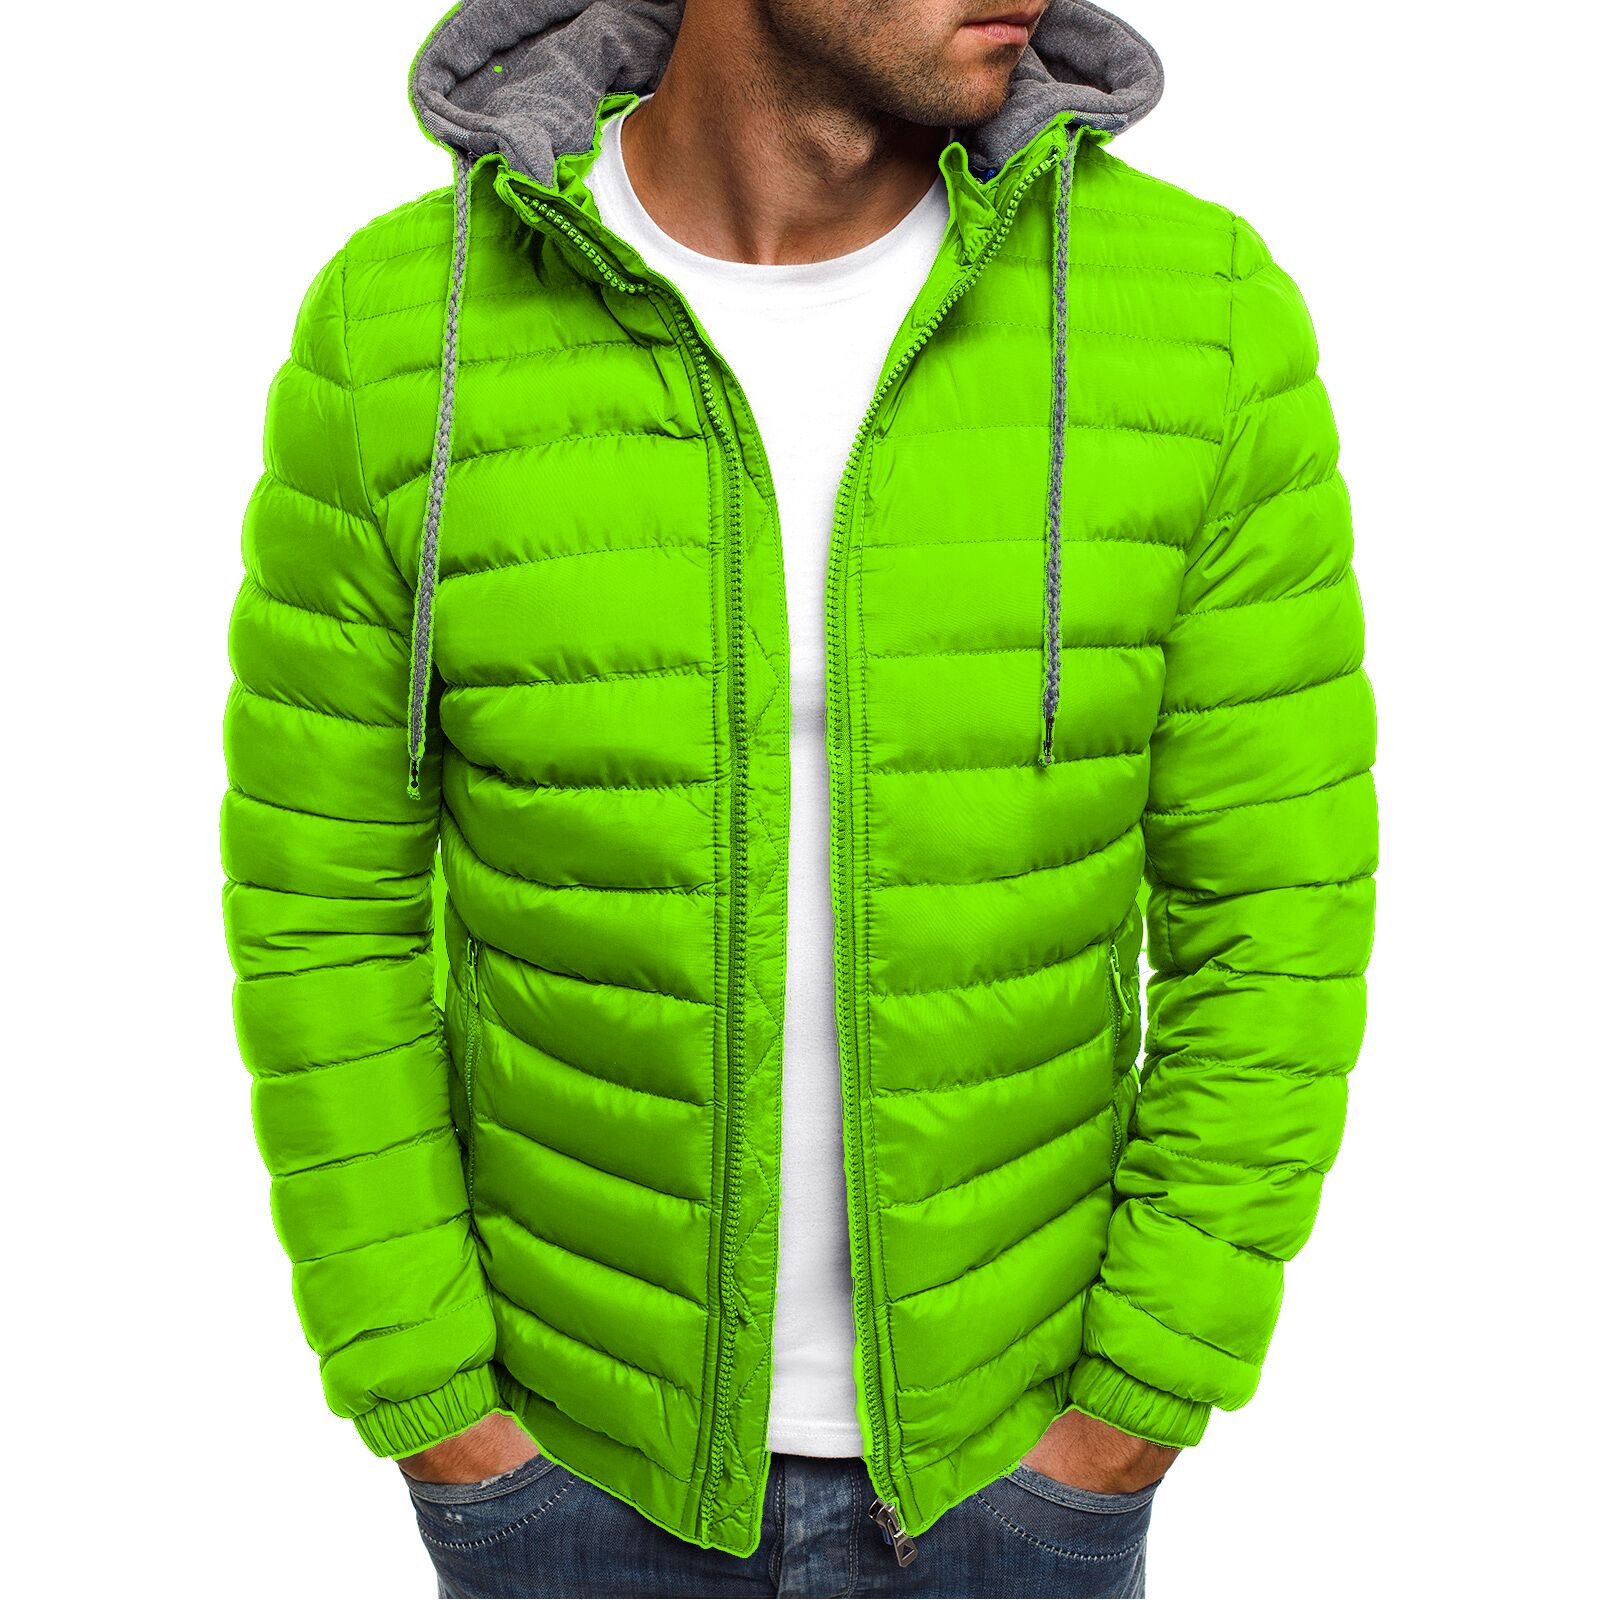 Hooded Down Jacket Winter Warm Hoodie Outwear Light Quality Packable Zipper Top Coat with Detachable Hat - image 1 of 6